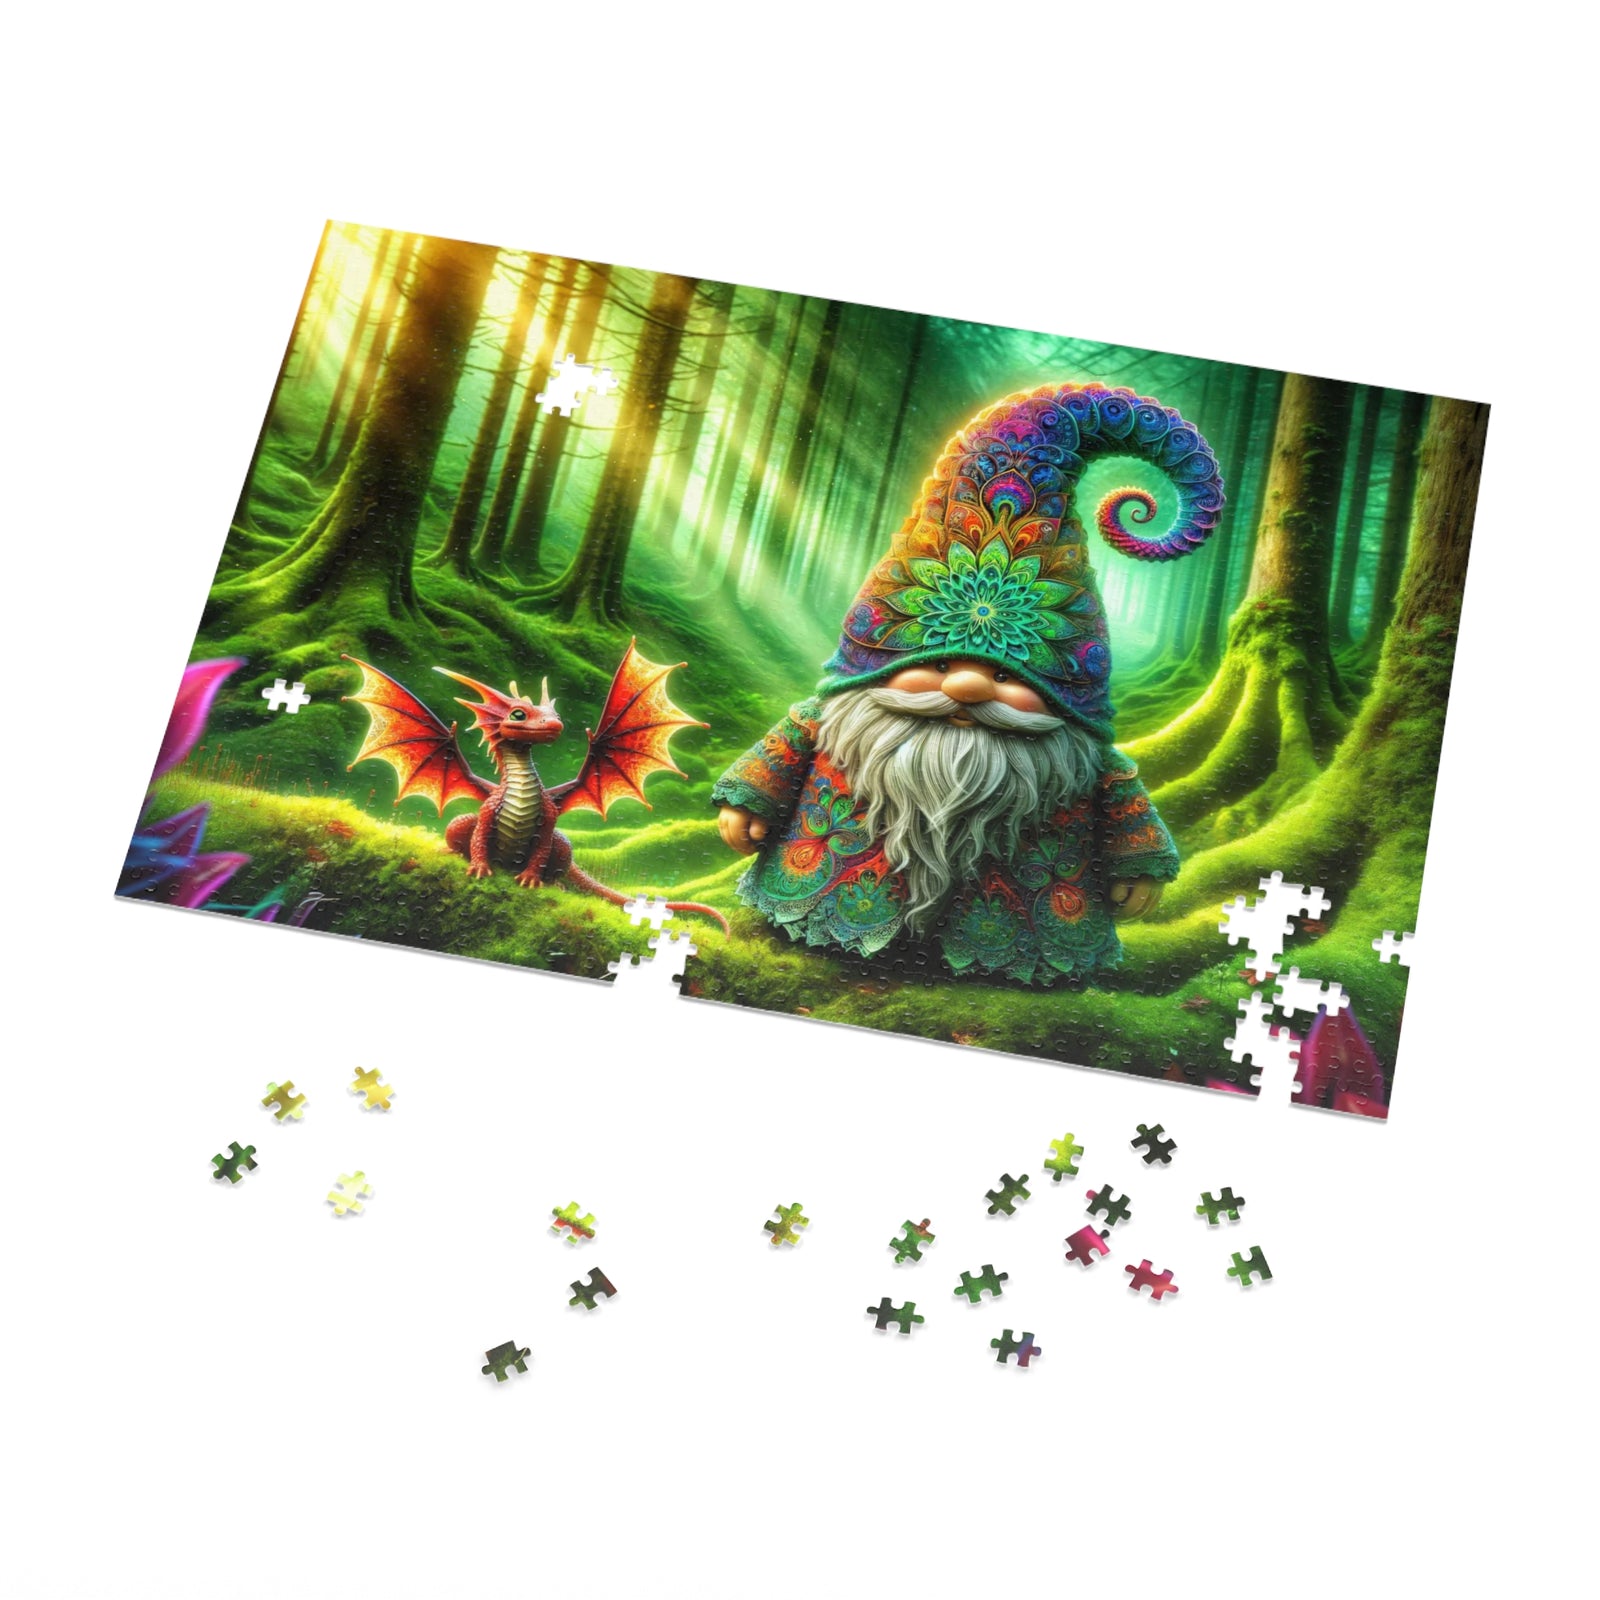 The Gnome's Enchanted Morn Jigsaw Puzzle